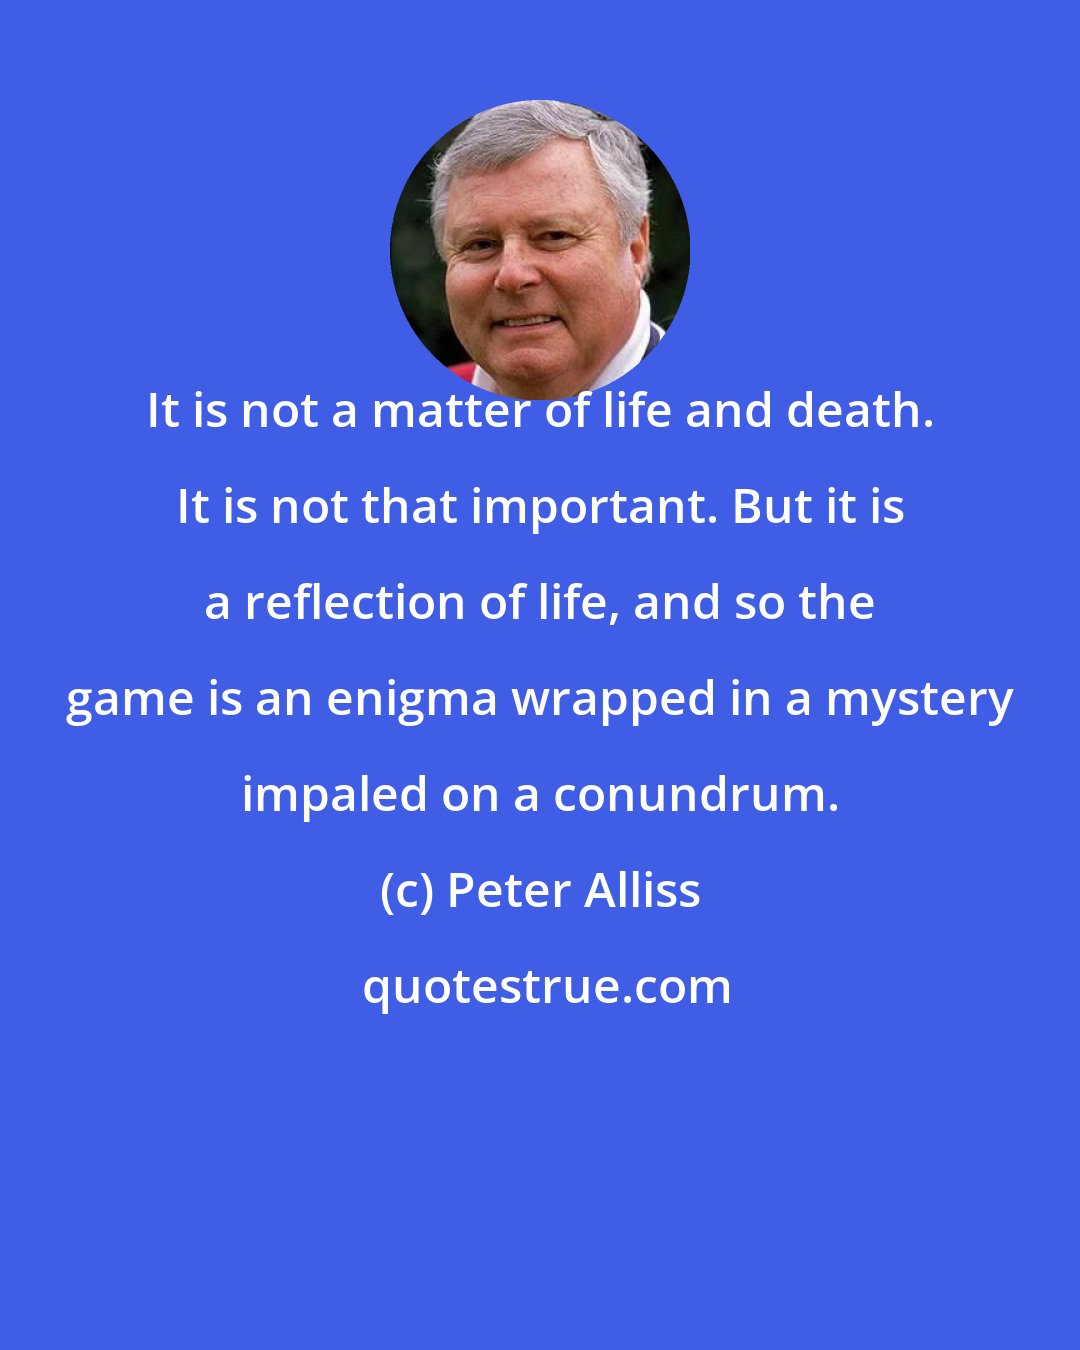 Peter Alliss: It is not a matter of life and death. It is not that important. But it is a reflection of life, and so the game is an enigma wrapped in a mystery impaled on a conundrum.